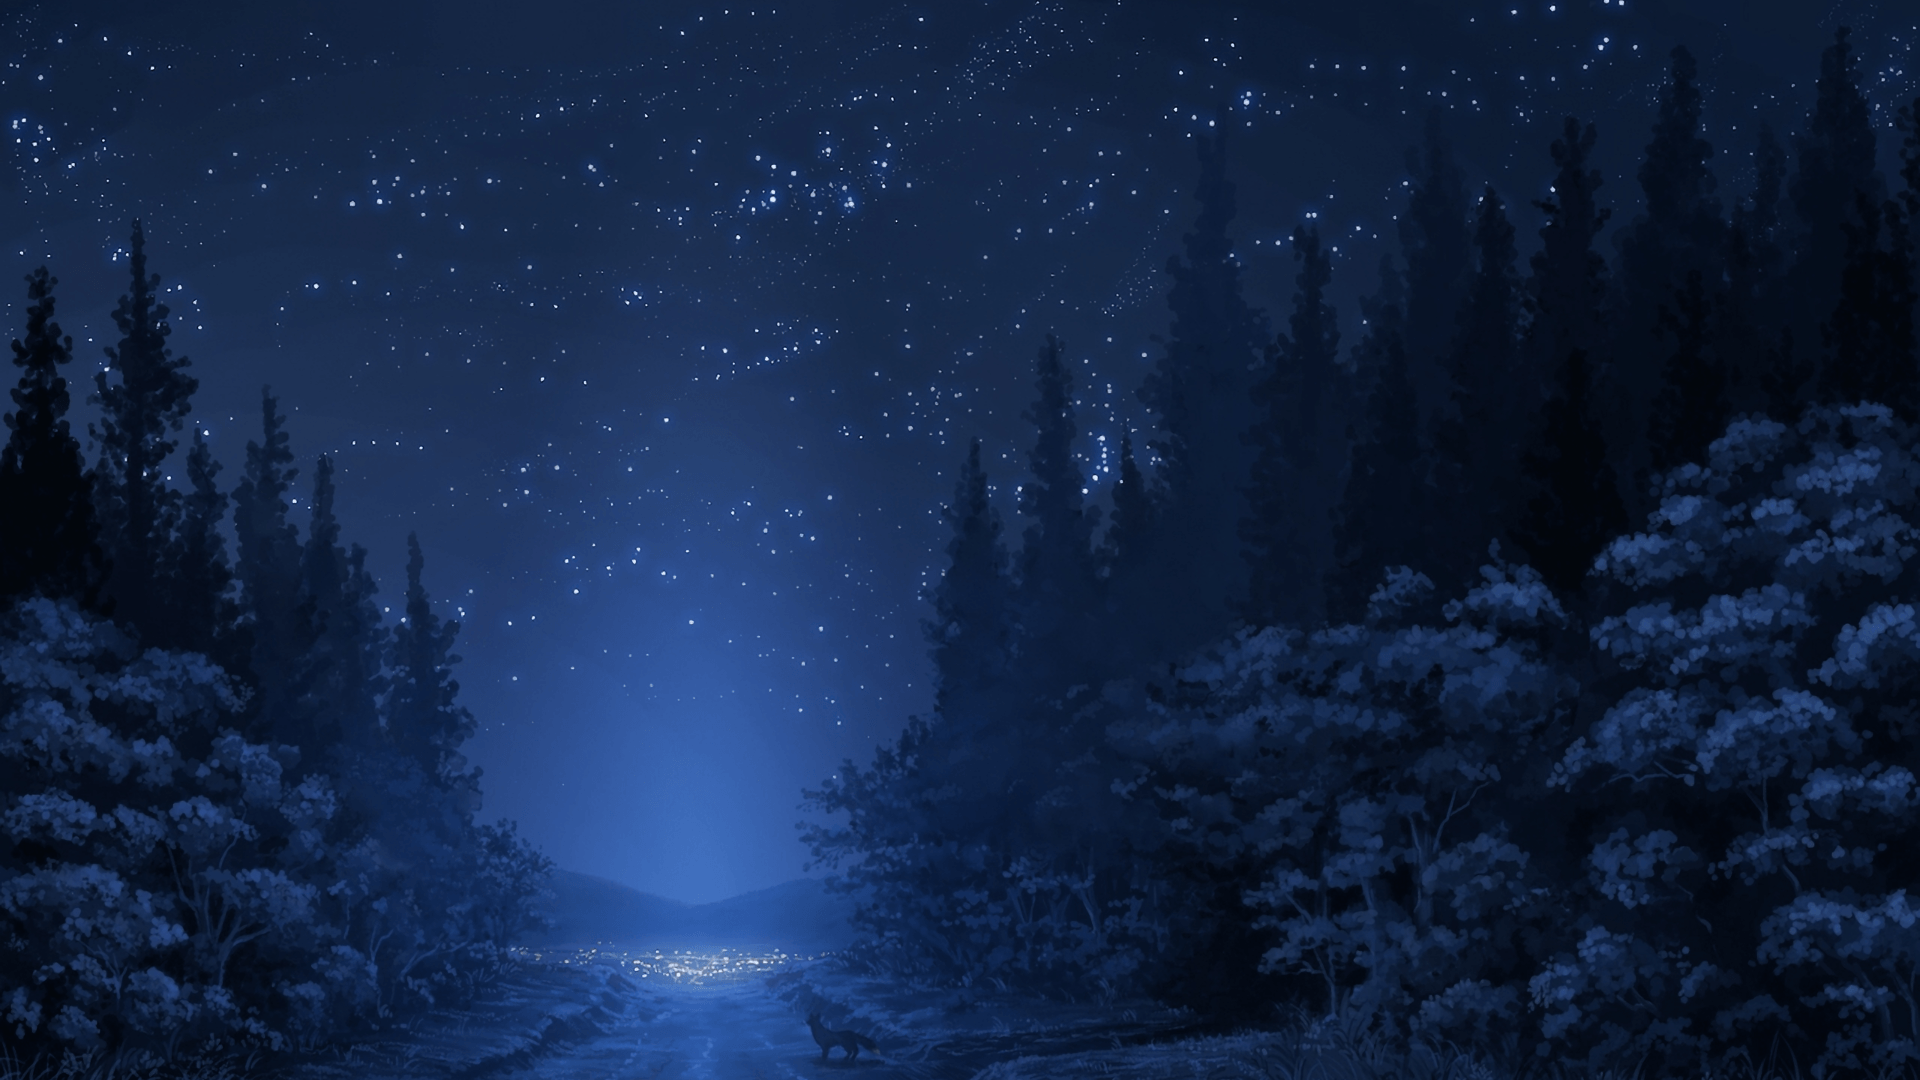 Download 1920x1080 Anime Landscape, Forest, Night, Stars, Wolf